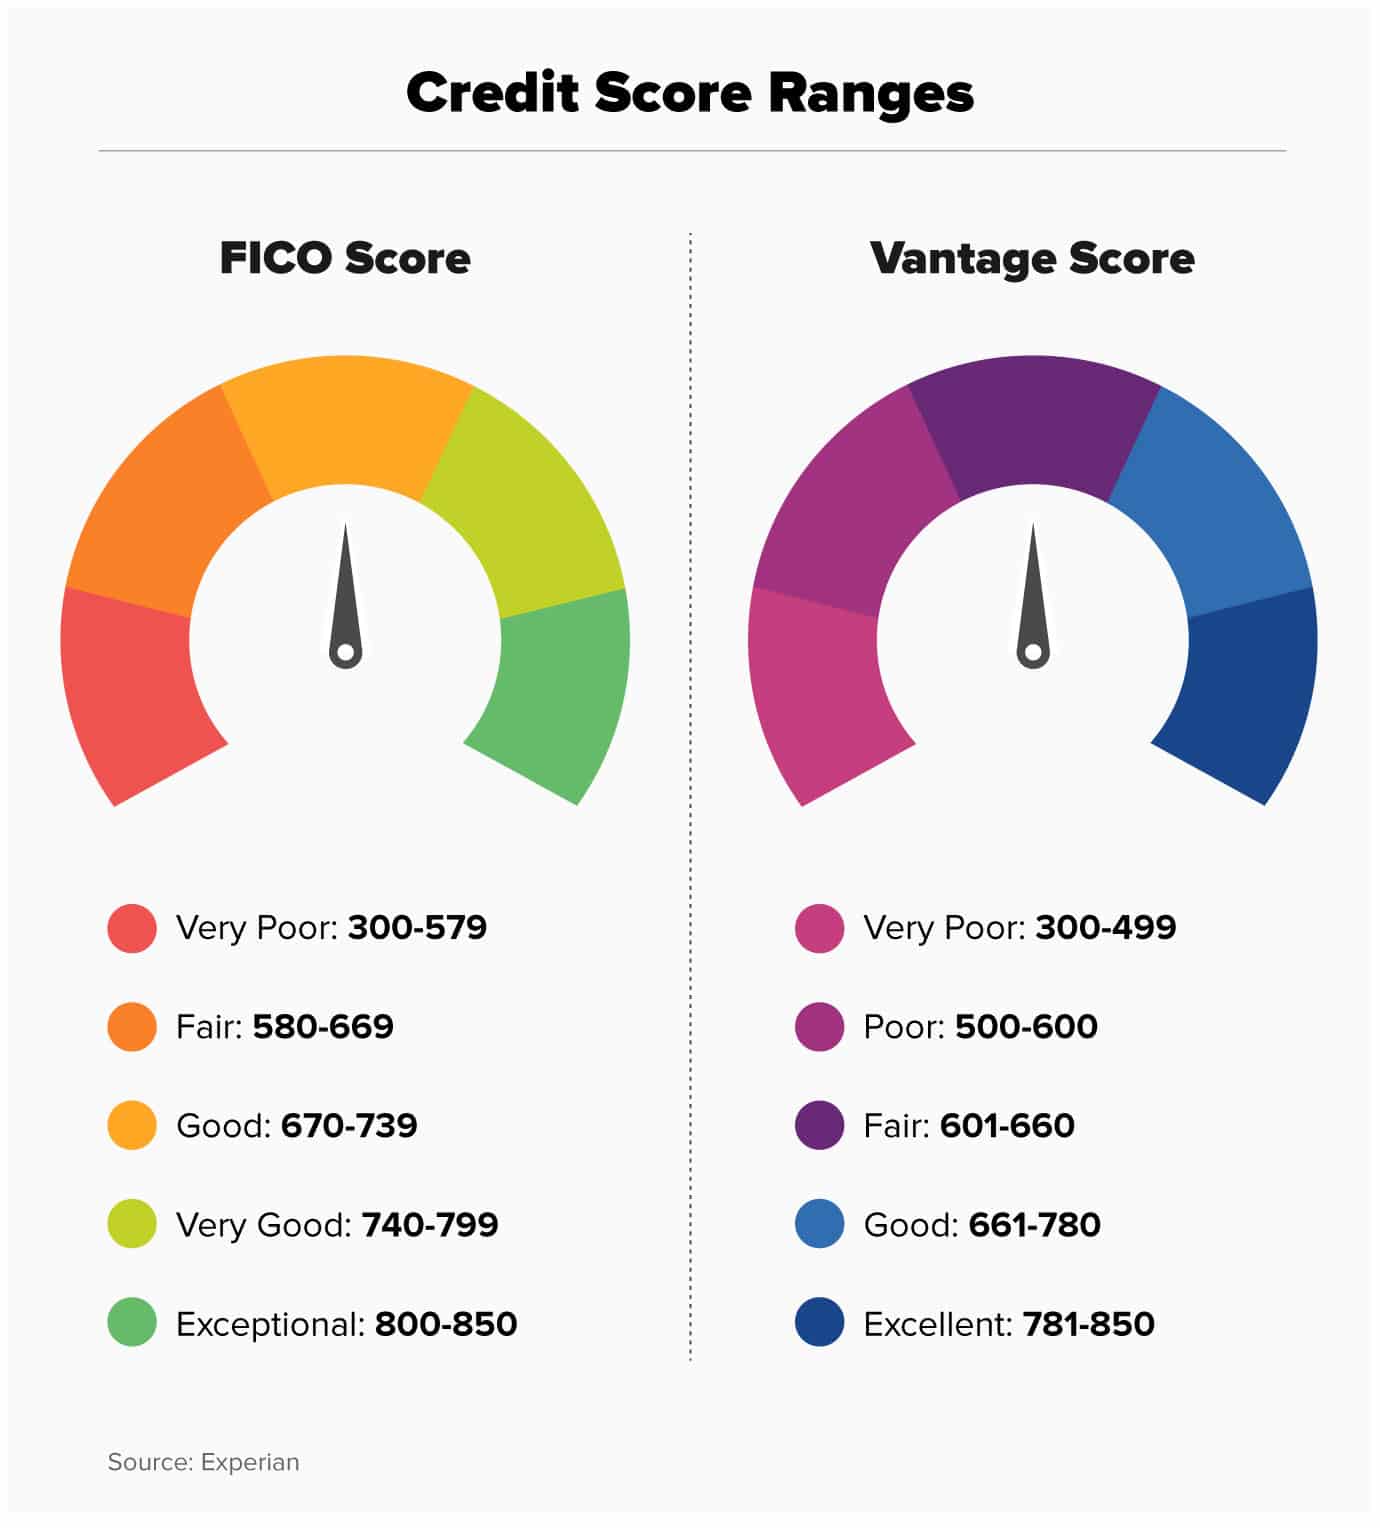 What Is a Credit Score?